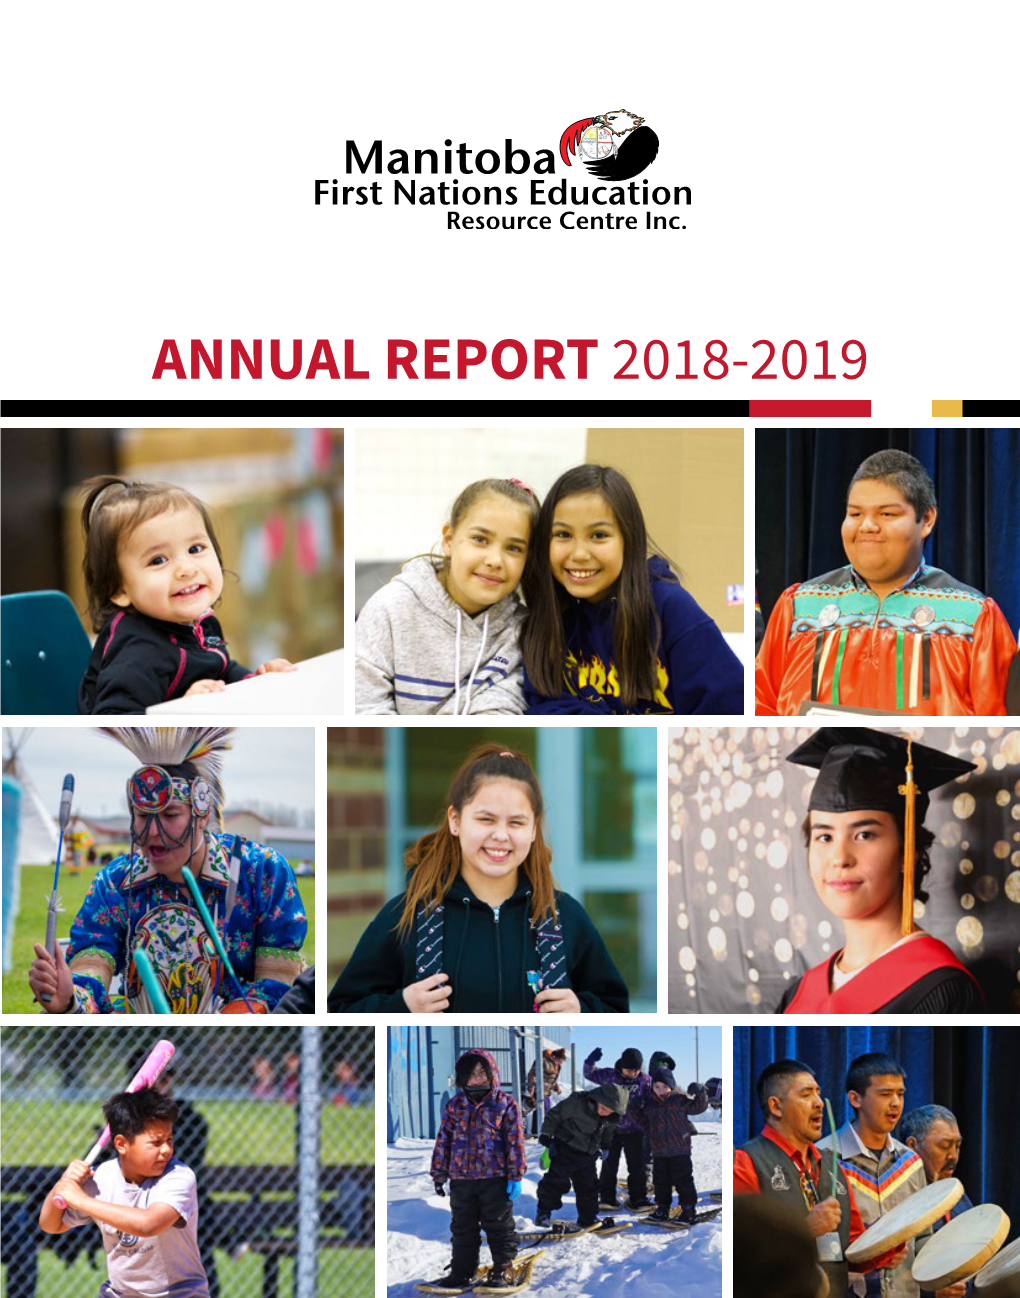 ANNUAL REPORT 2018-2019 Manitoba First Nations Education Resource Centre Inc